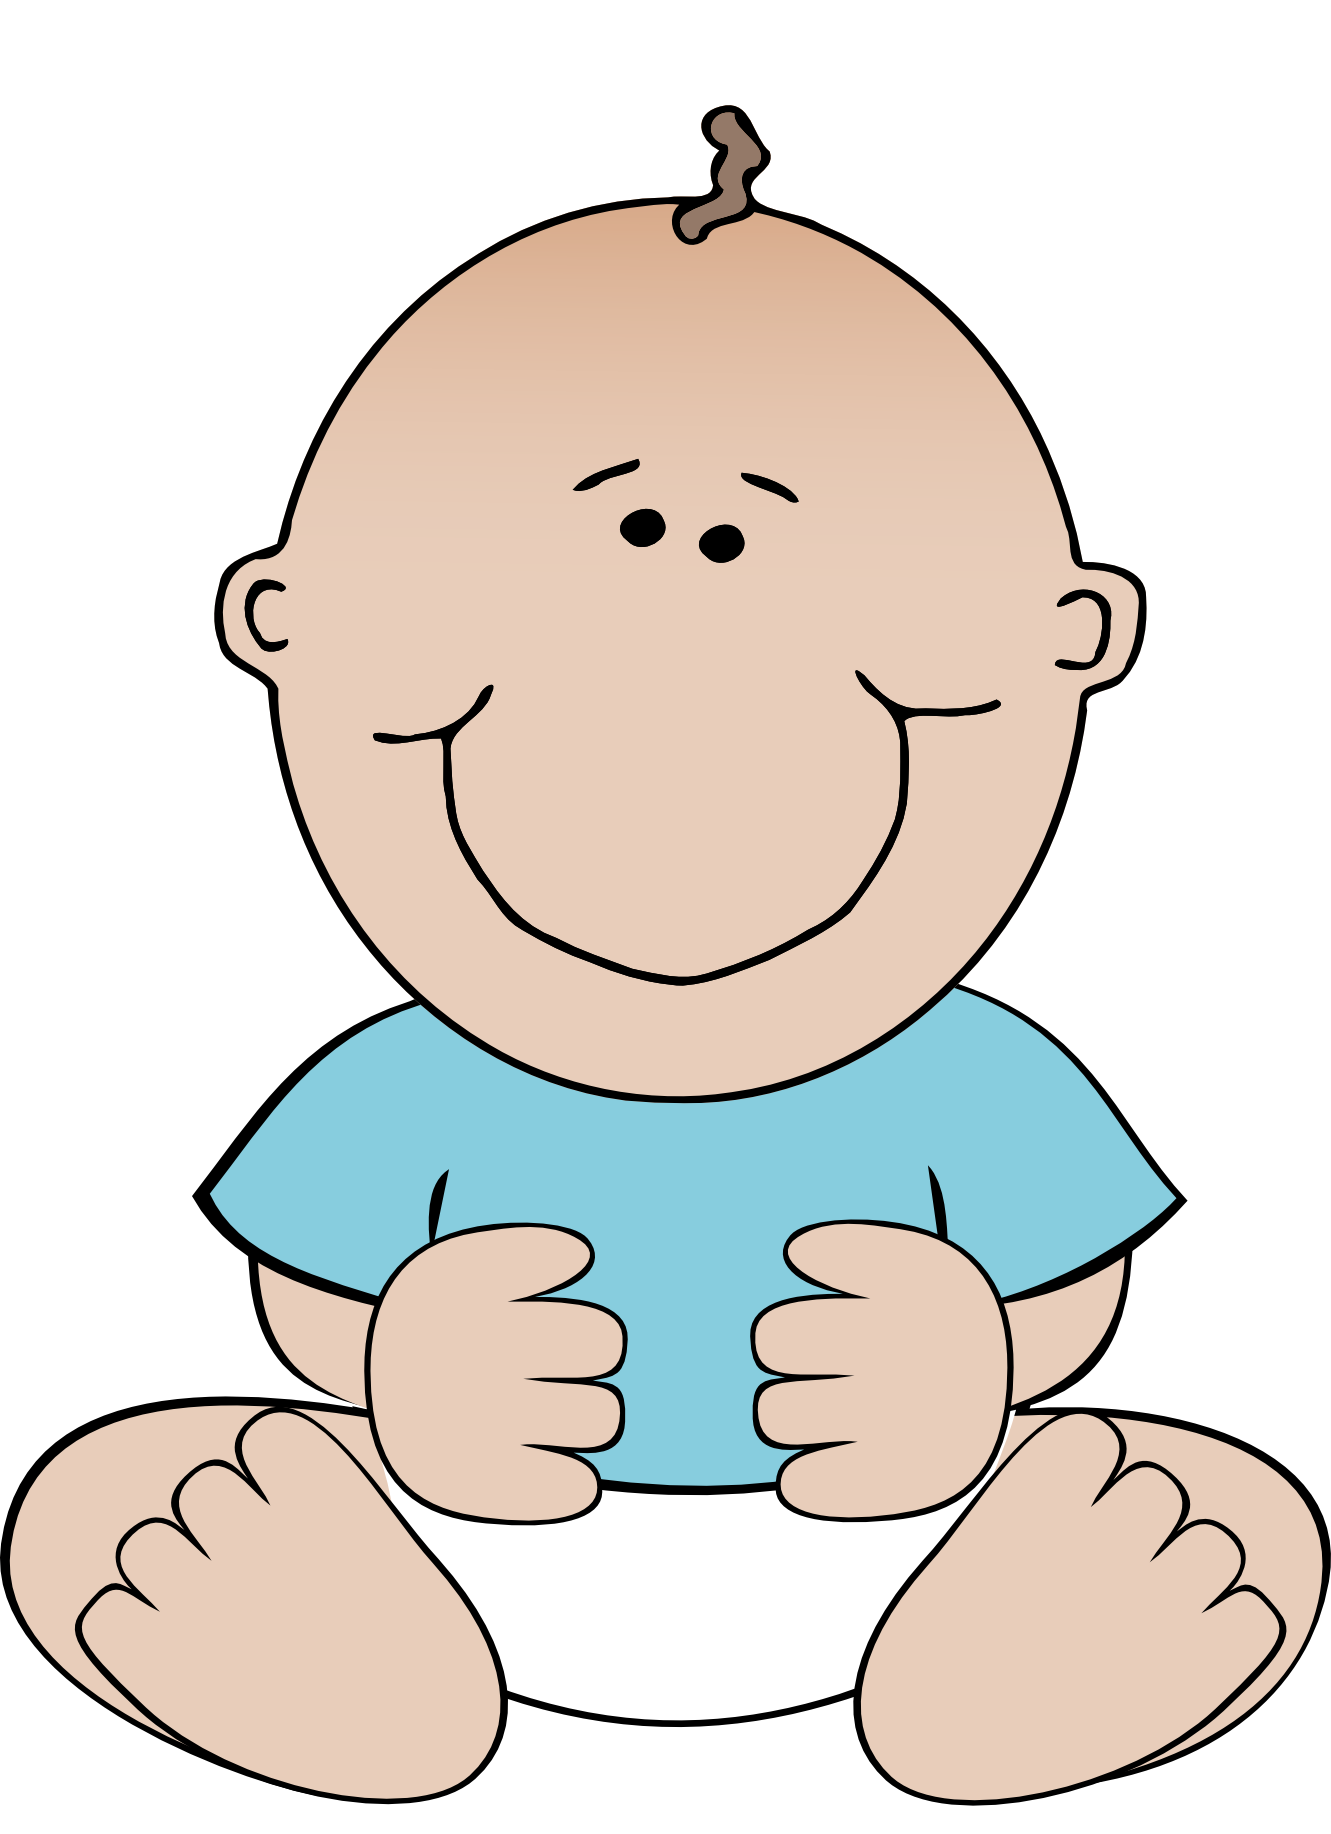 clipart pouting baby - photo #21